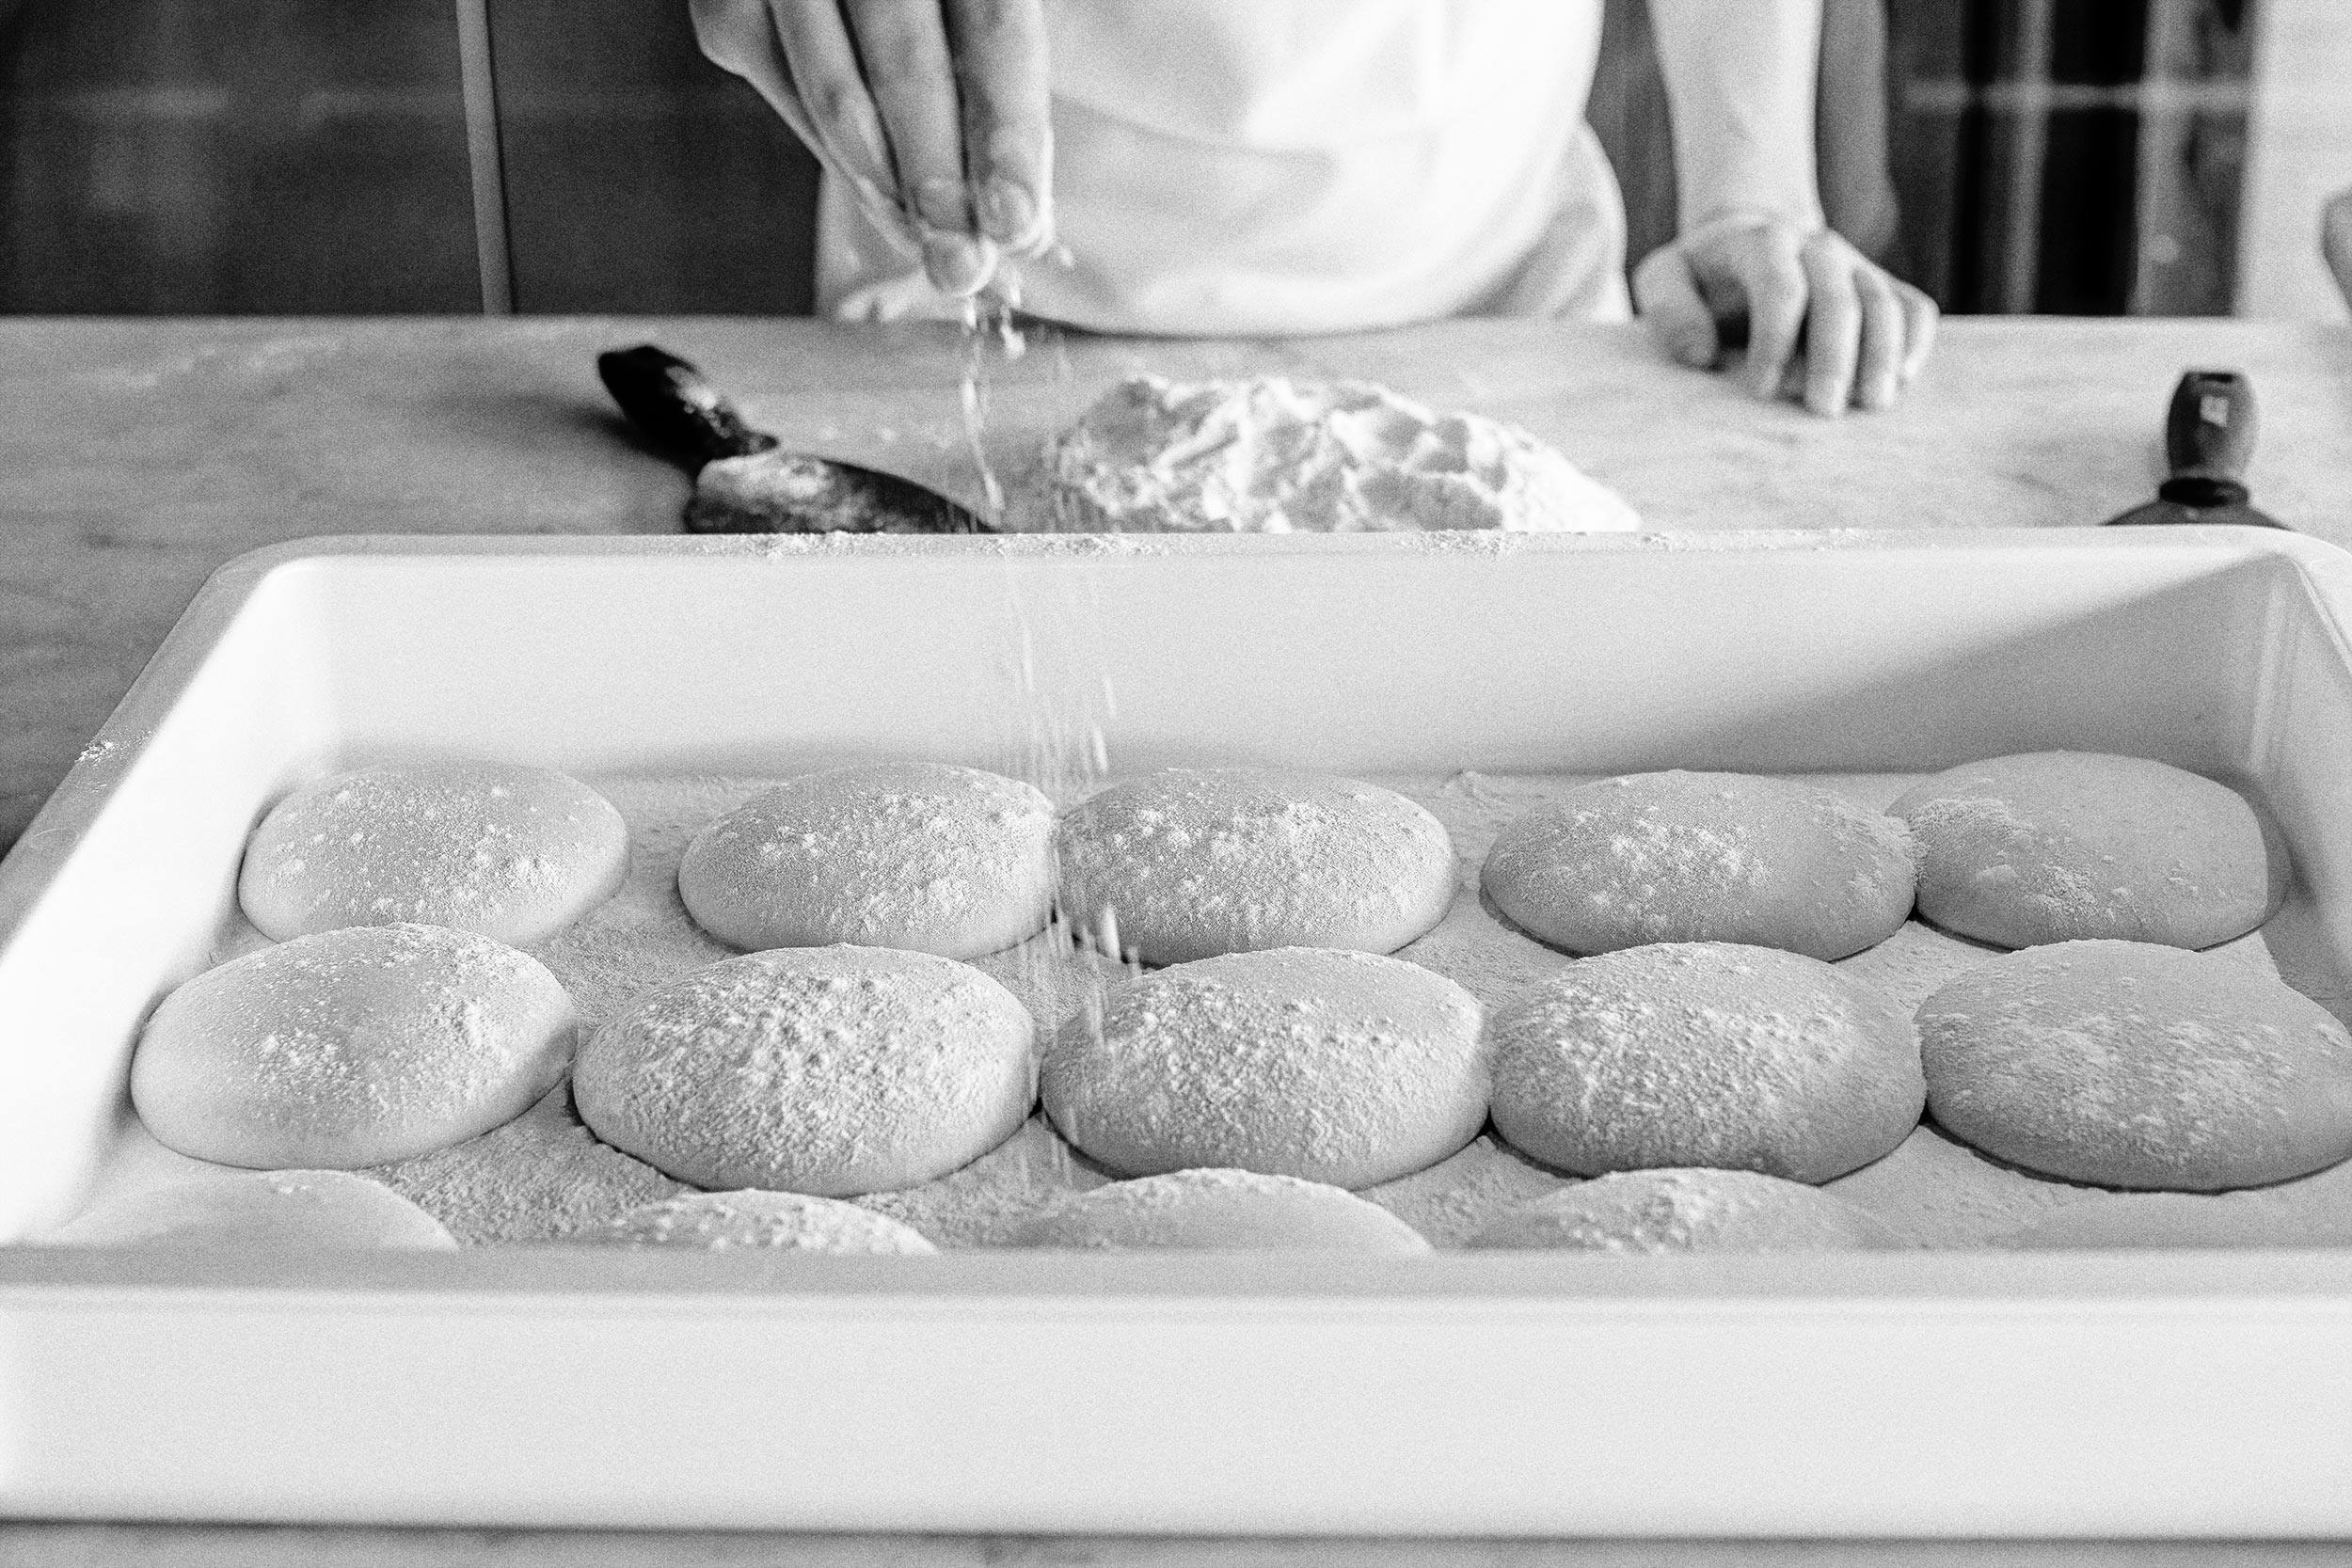 Pizza dough getting sprinkled with flour for Pizzaria Locale